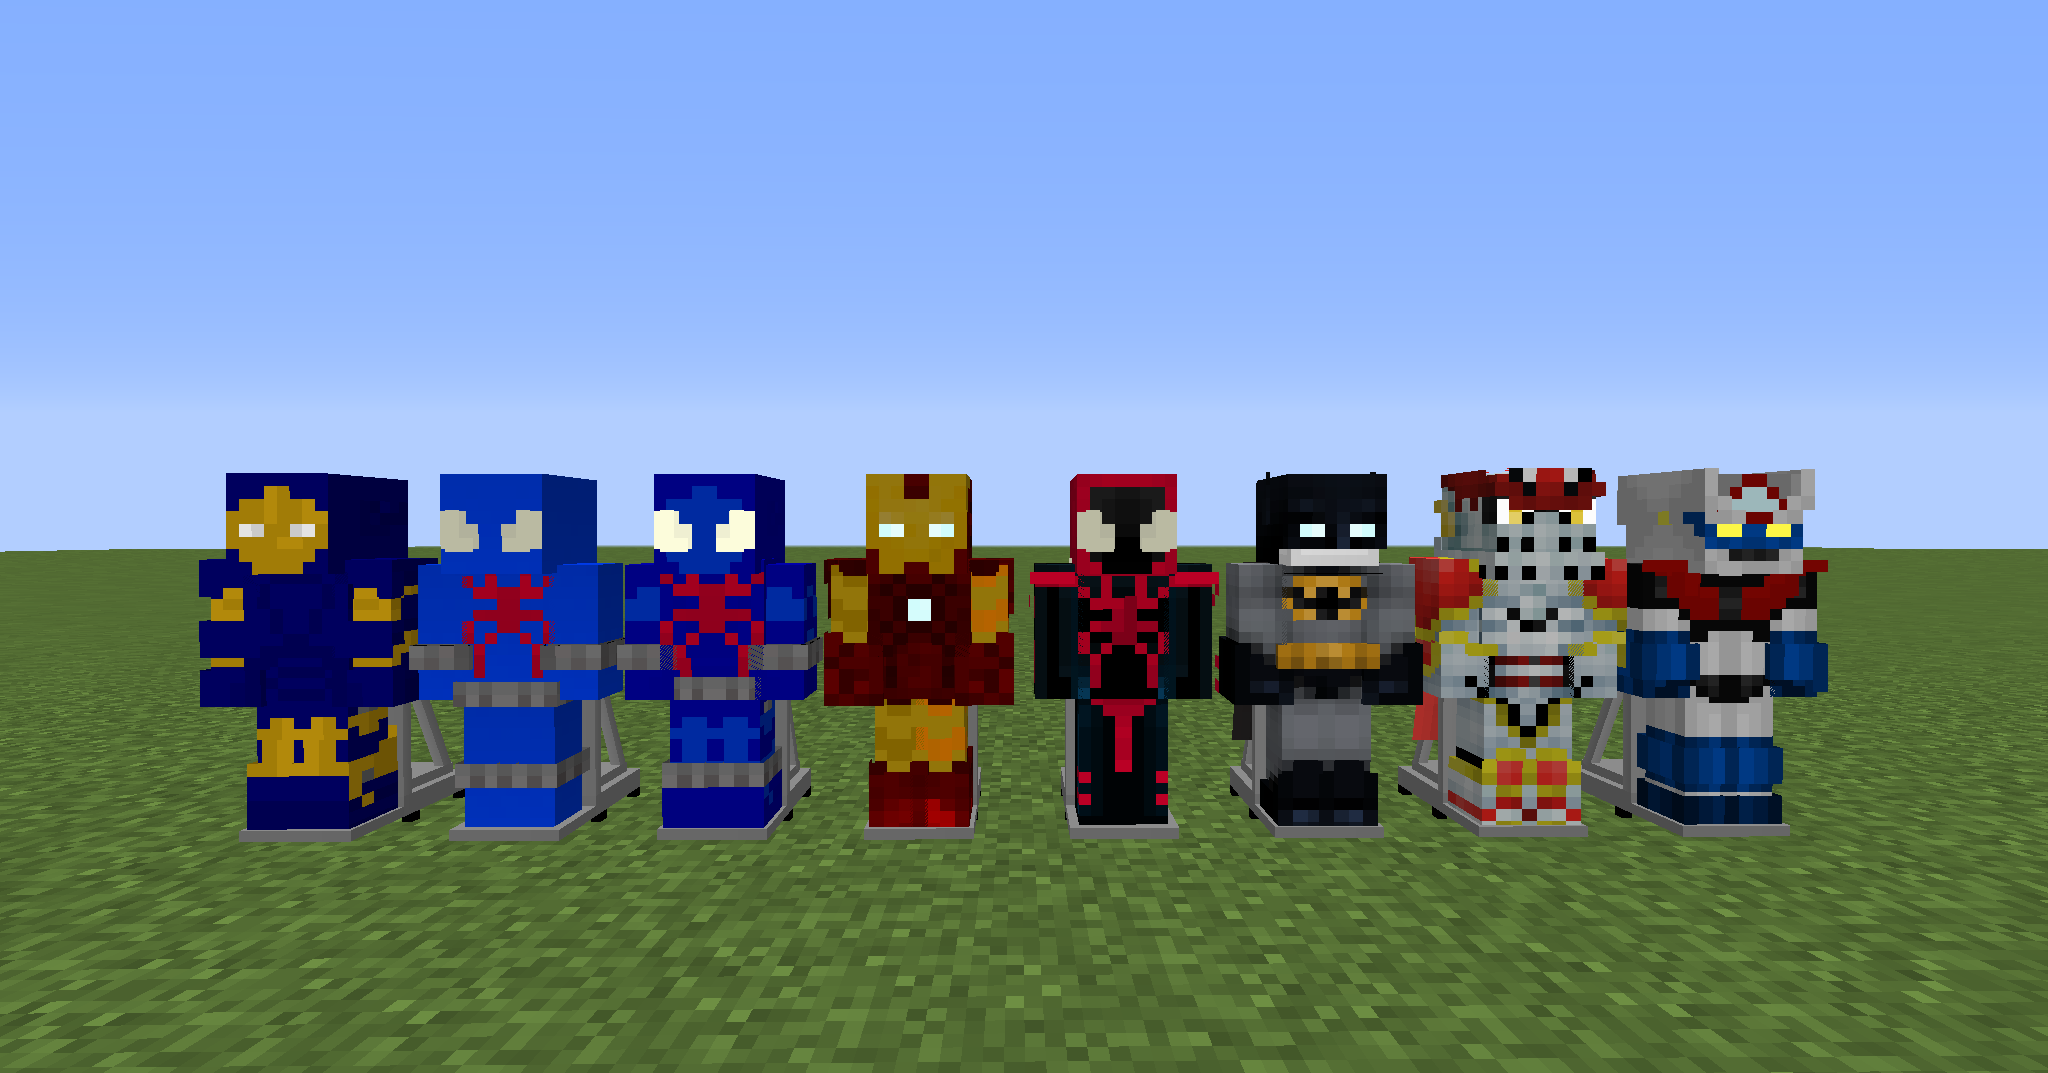 Superheroes pack. Heroes Expansion Mod 1.12.2. Аддон на Heroes Expansion 1.12.2. Lucraft Core Mod 1.12.2. Мод Heroes Expansion.